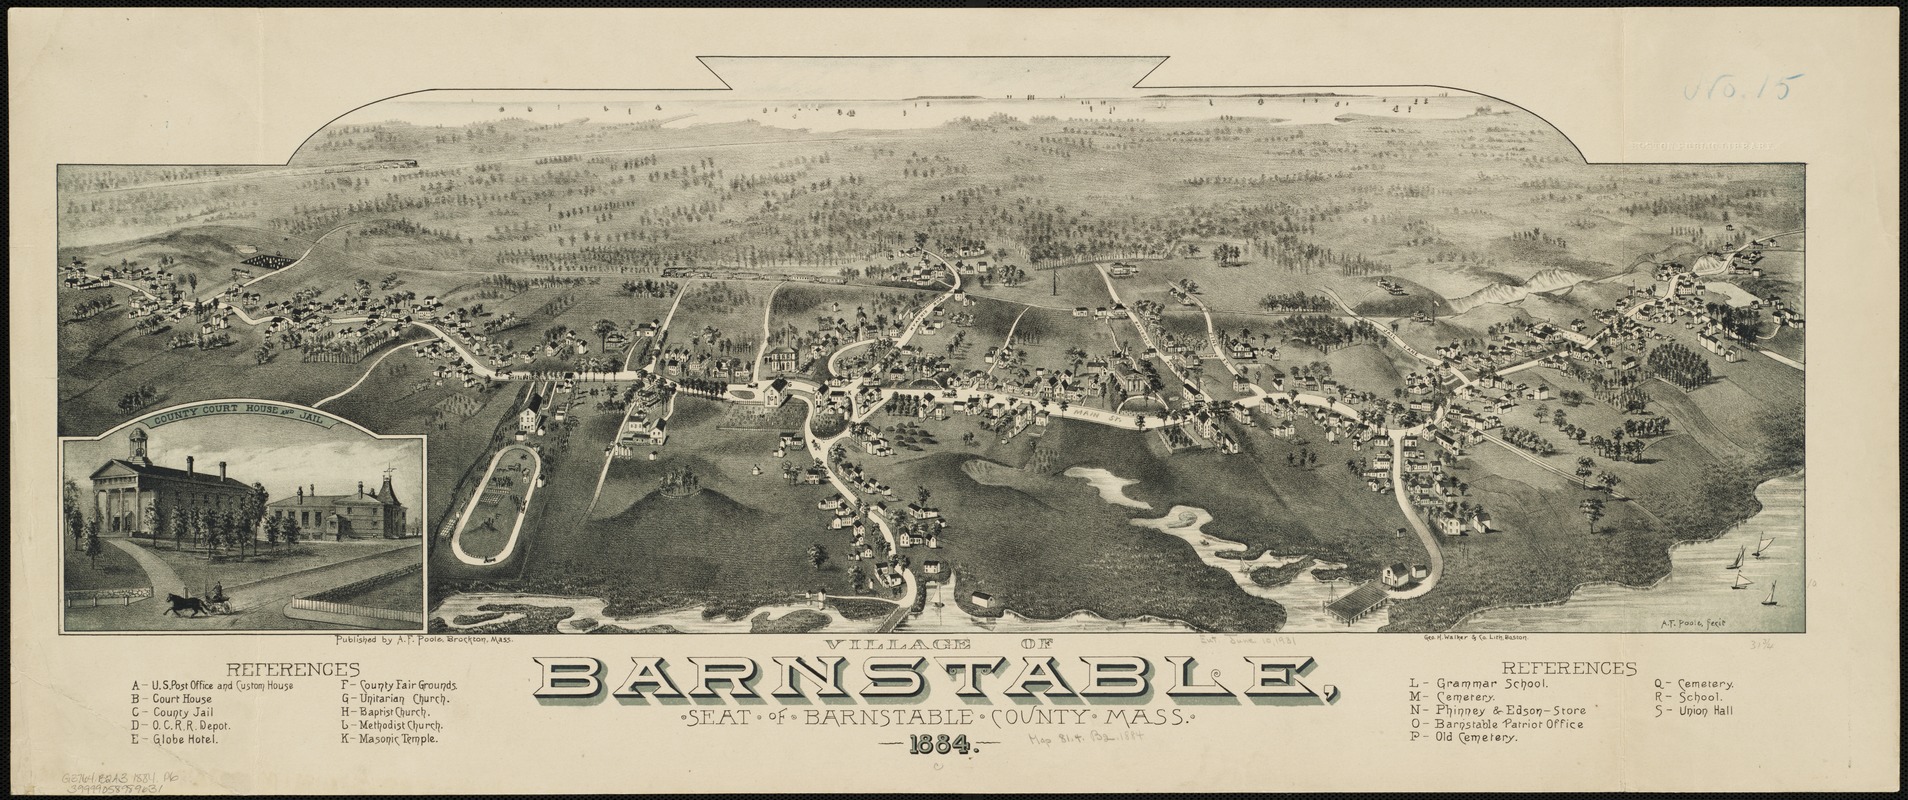 Village of Barnstable, seat of Barnstable County, Mass